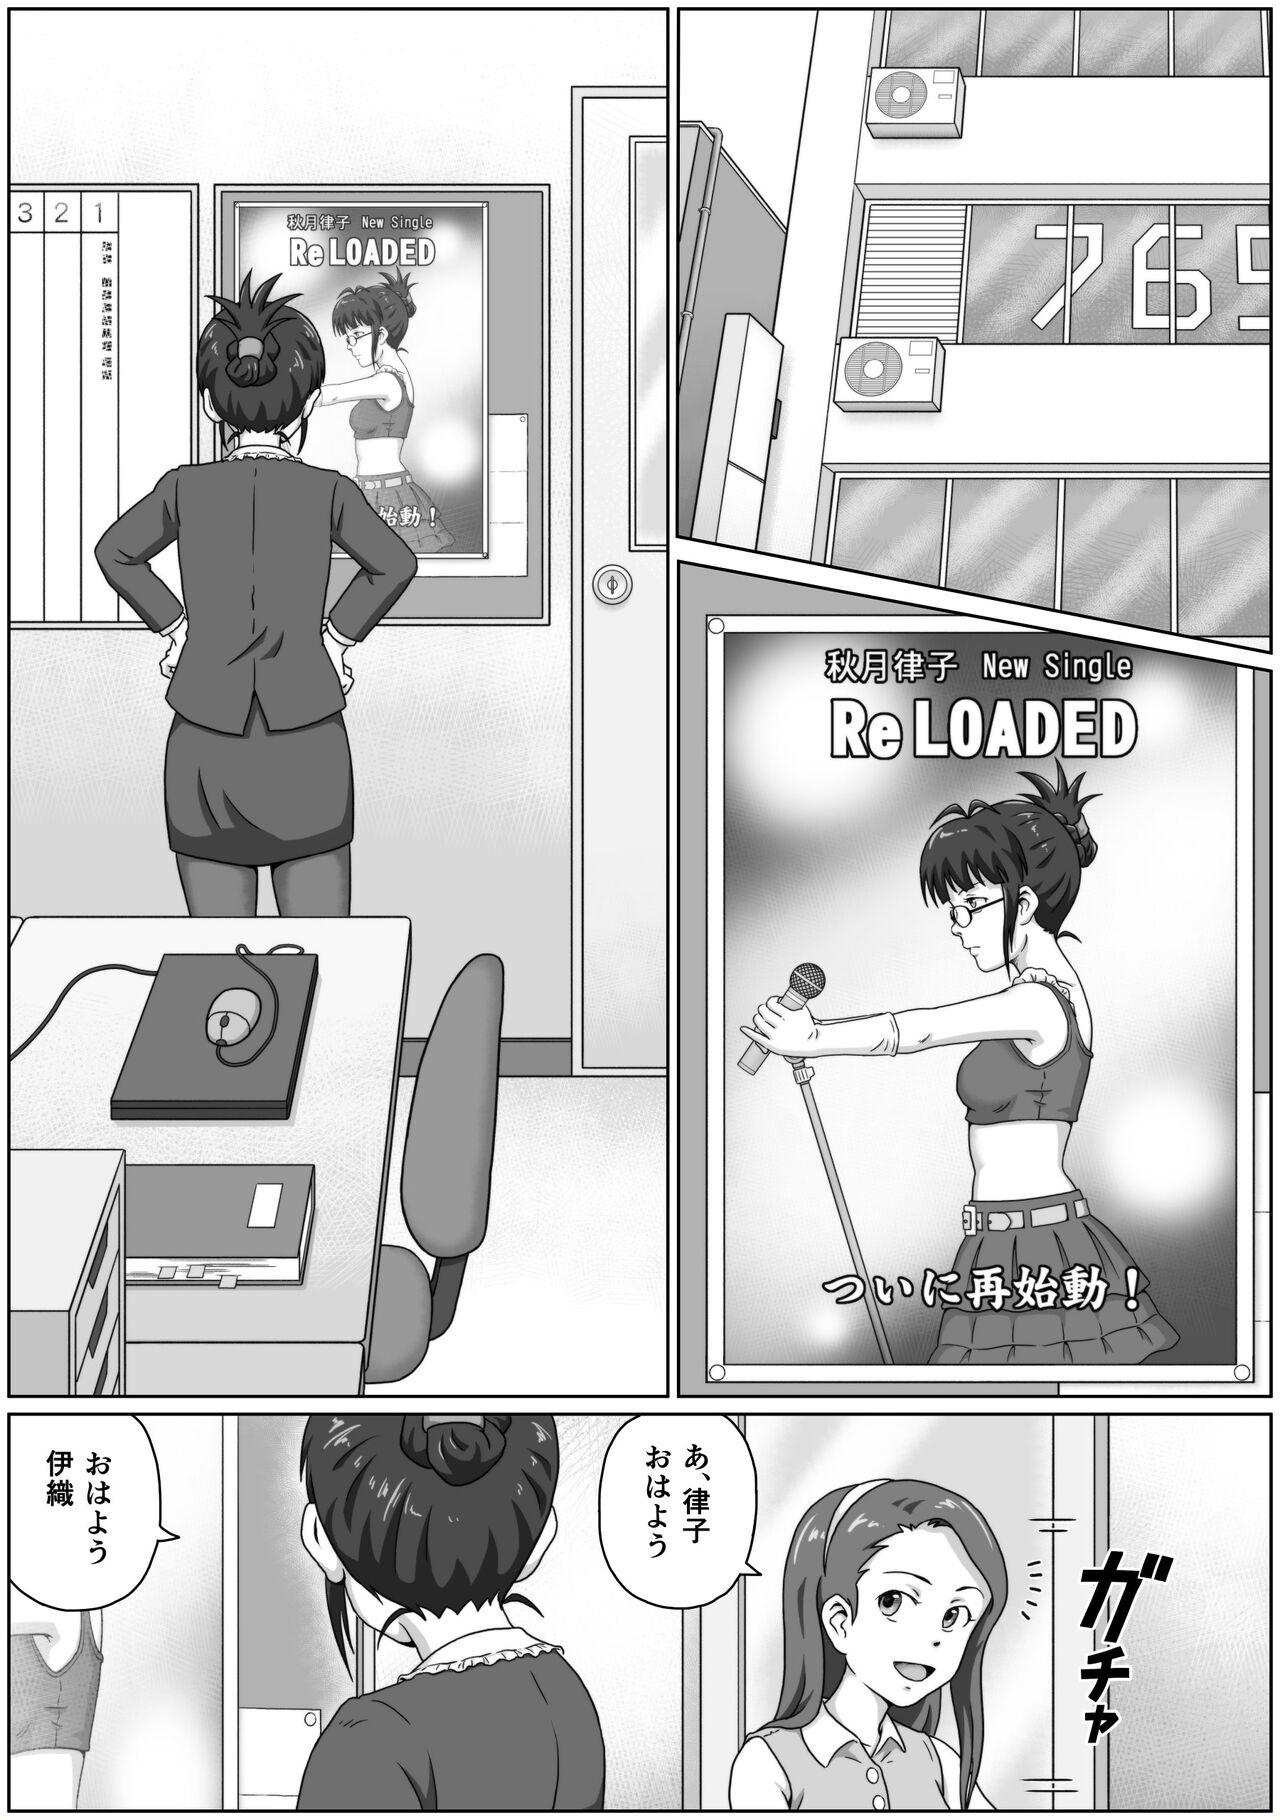 Longhair ReLOADED - The idolmaster Porn Blow Jobs - Page 3